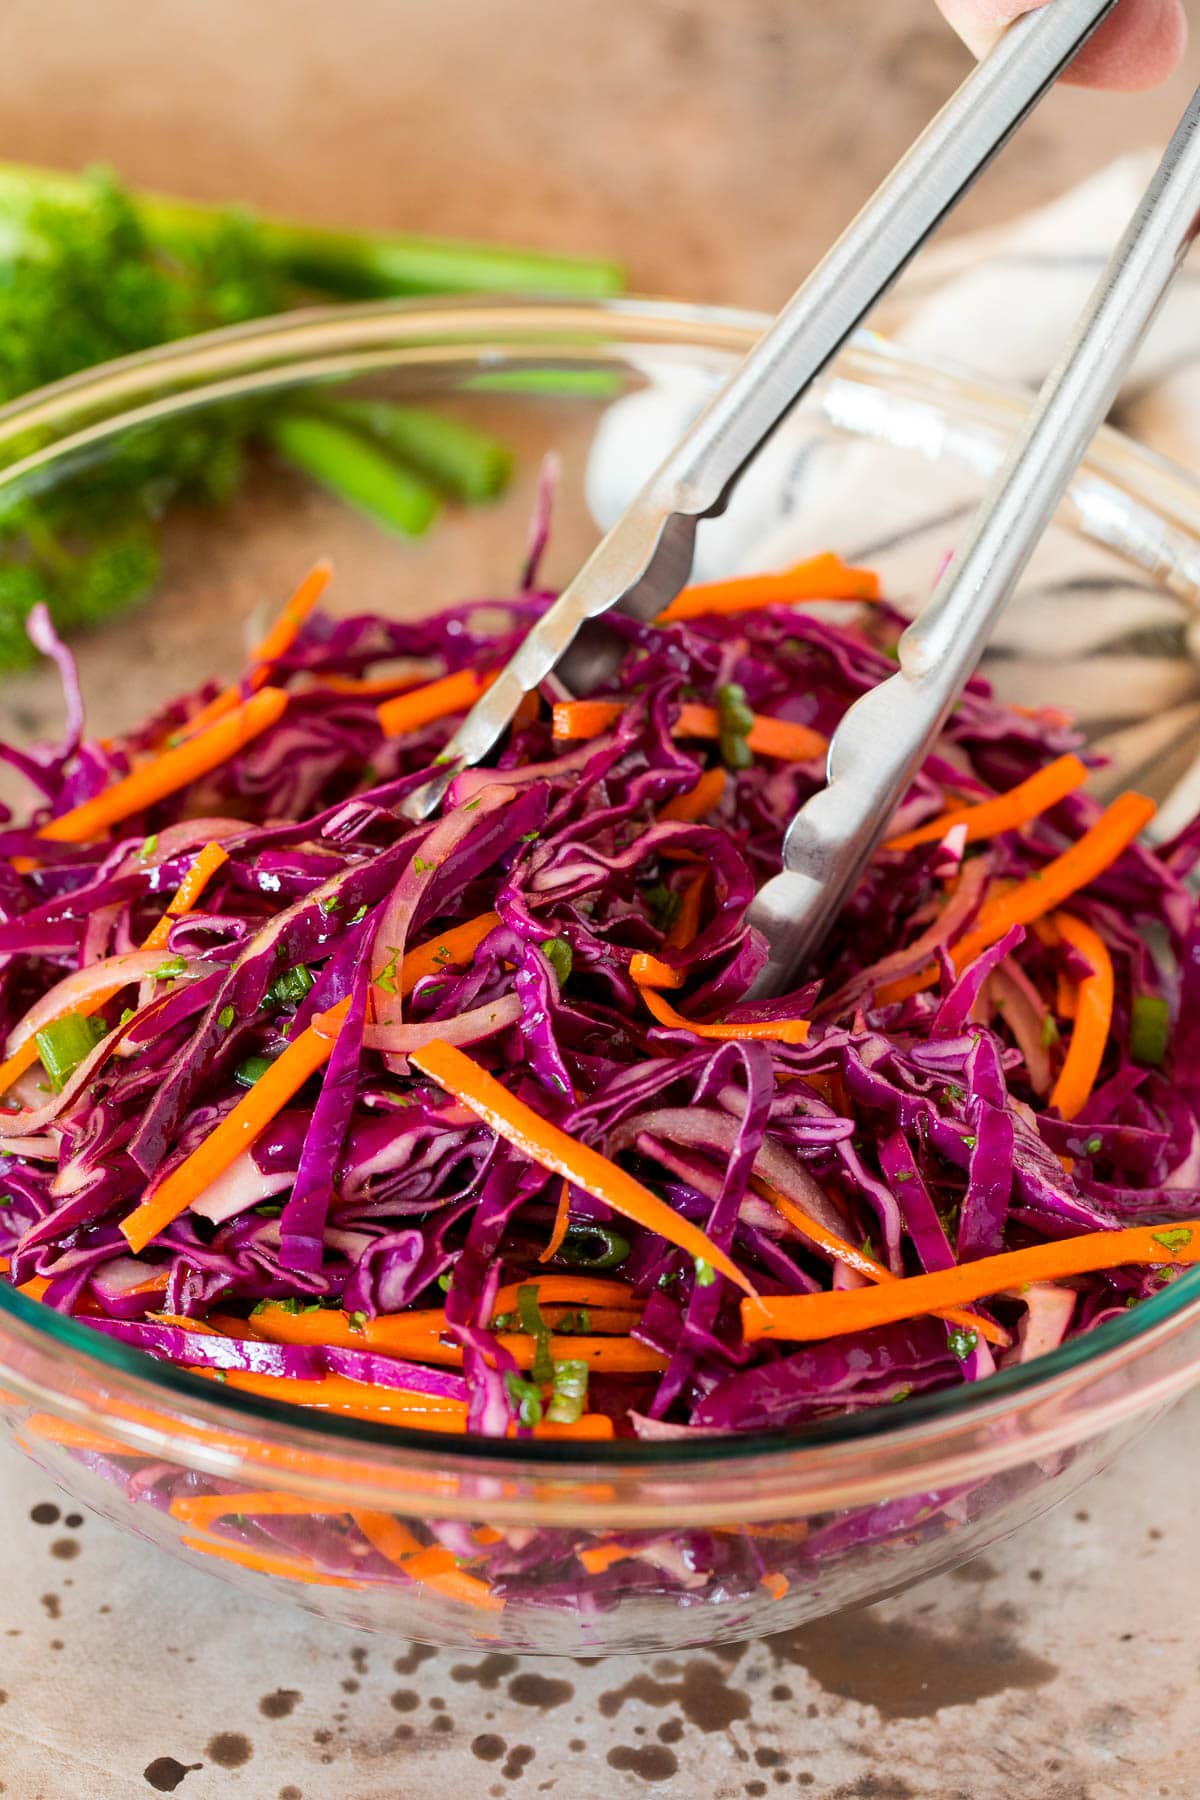 Tongs serving a portion of red cabbage slaw.